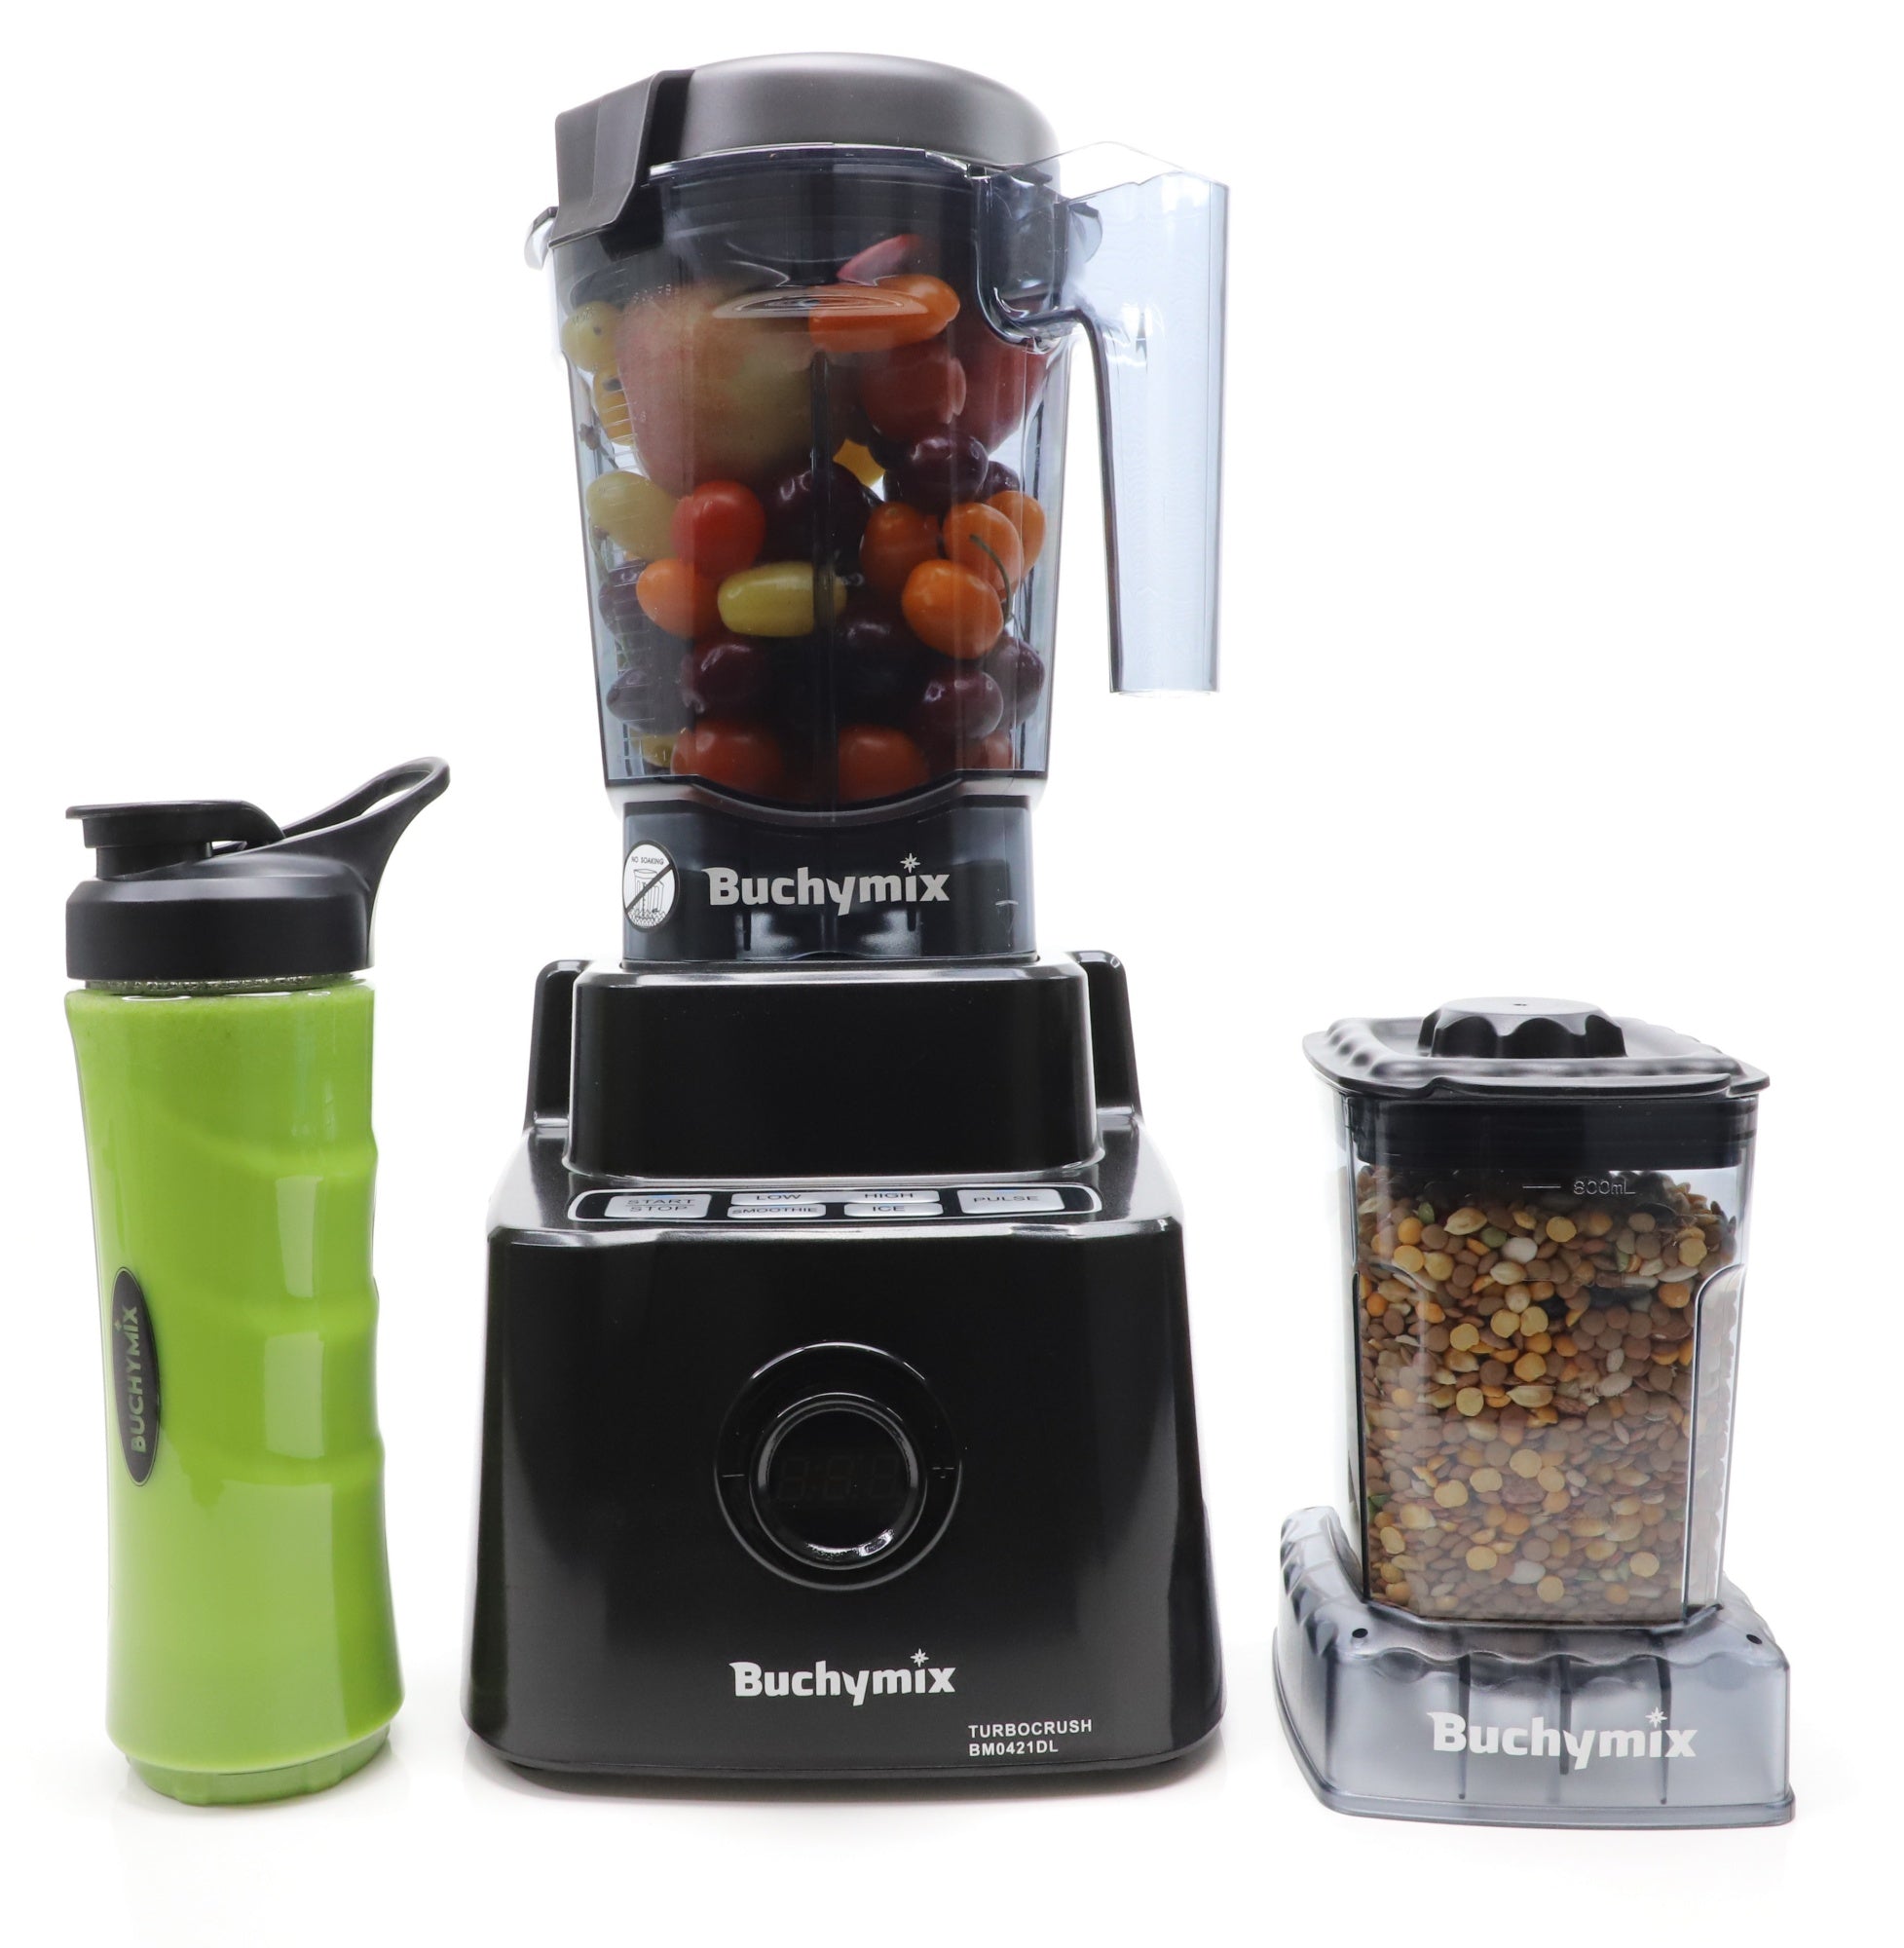 Buchymix blender will rule your kitchen. Blend anything and